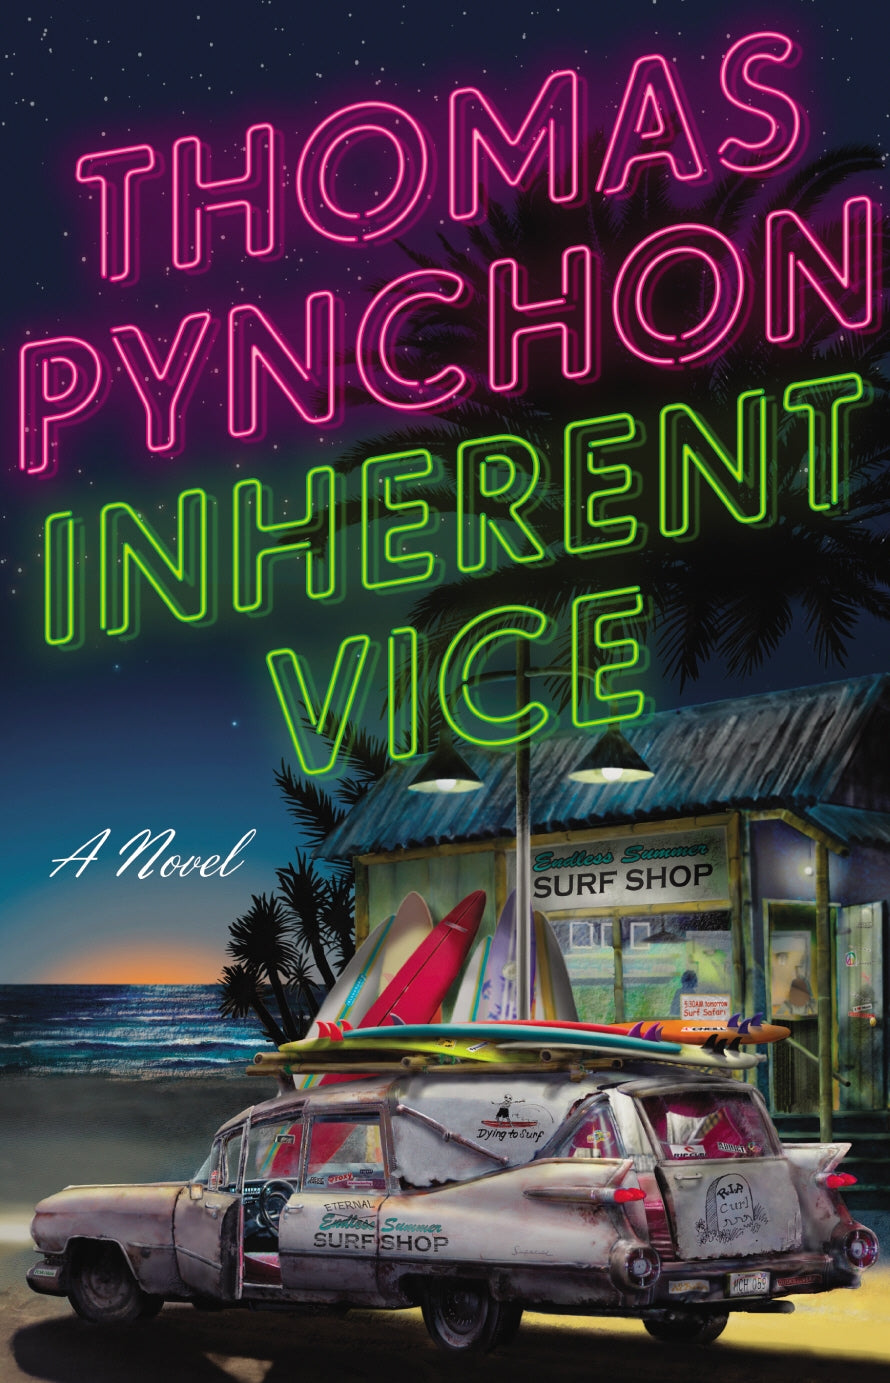 Inherent Vice by Thomas Pynchon: stock image of front cover.